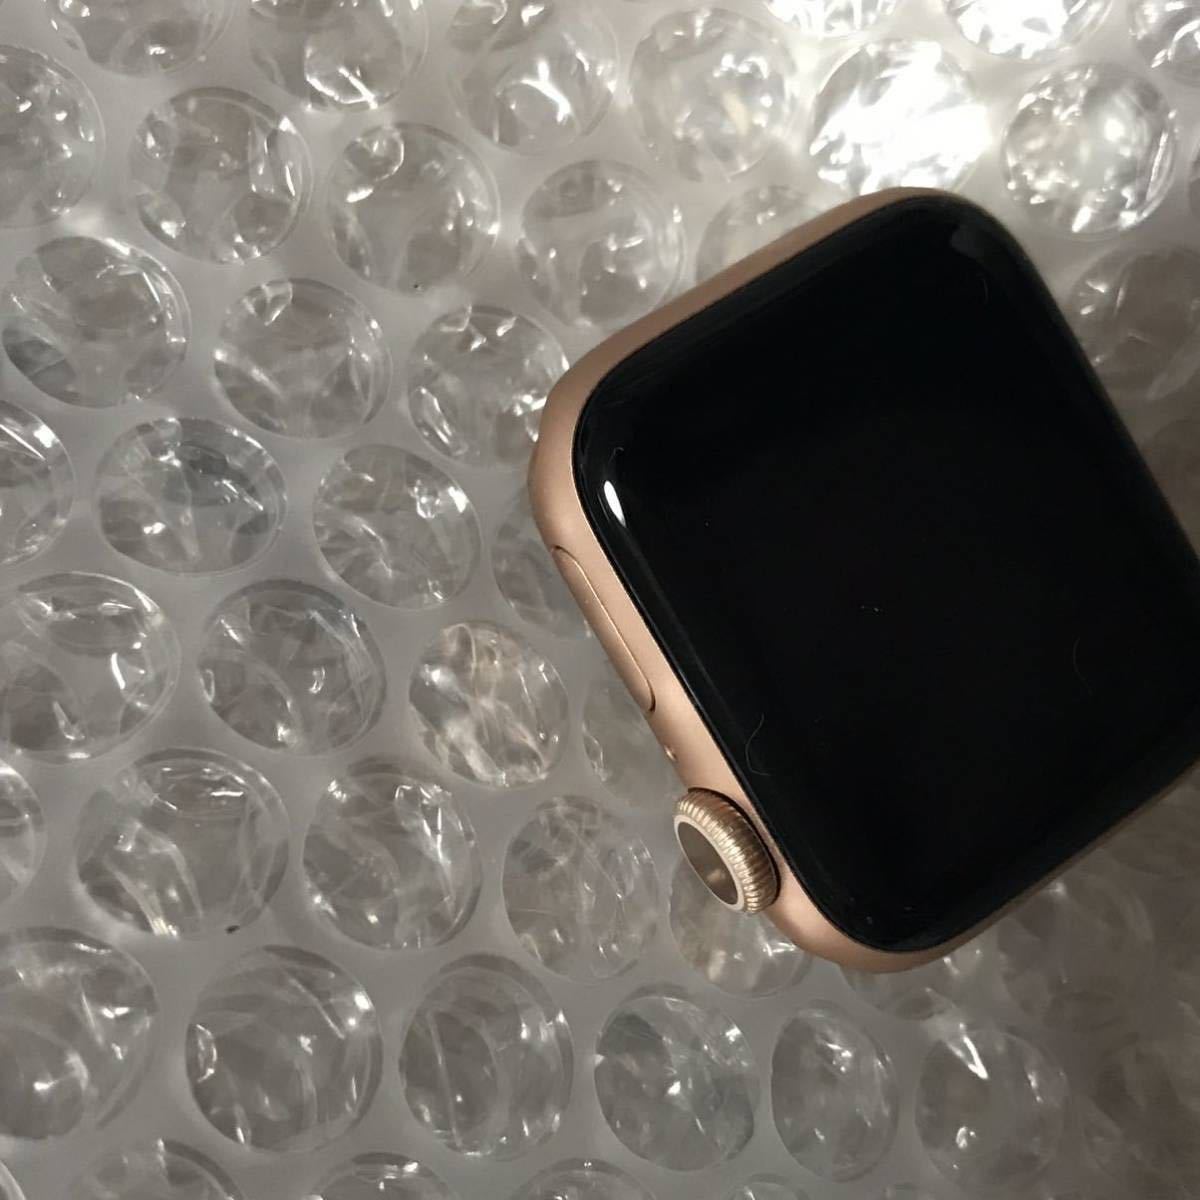 Apple Watch Series 6 (GPS model ) 40mm Gold aluminium case Apple watch battery 89% Band,cable less beautiful goods 